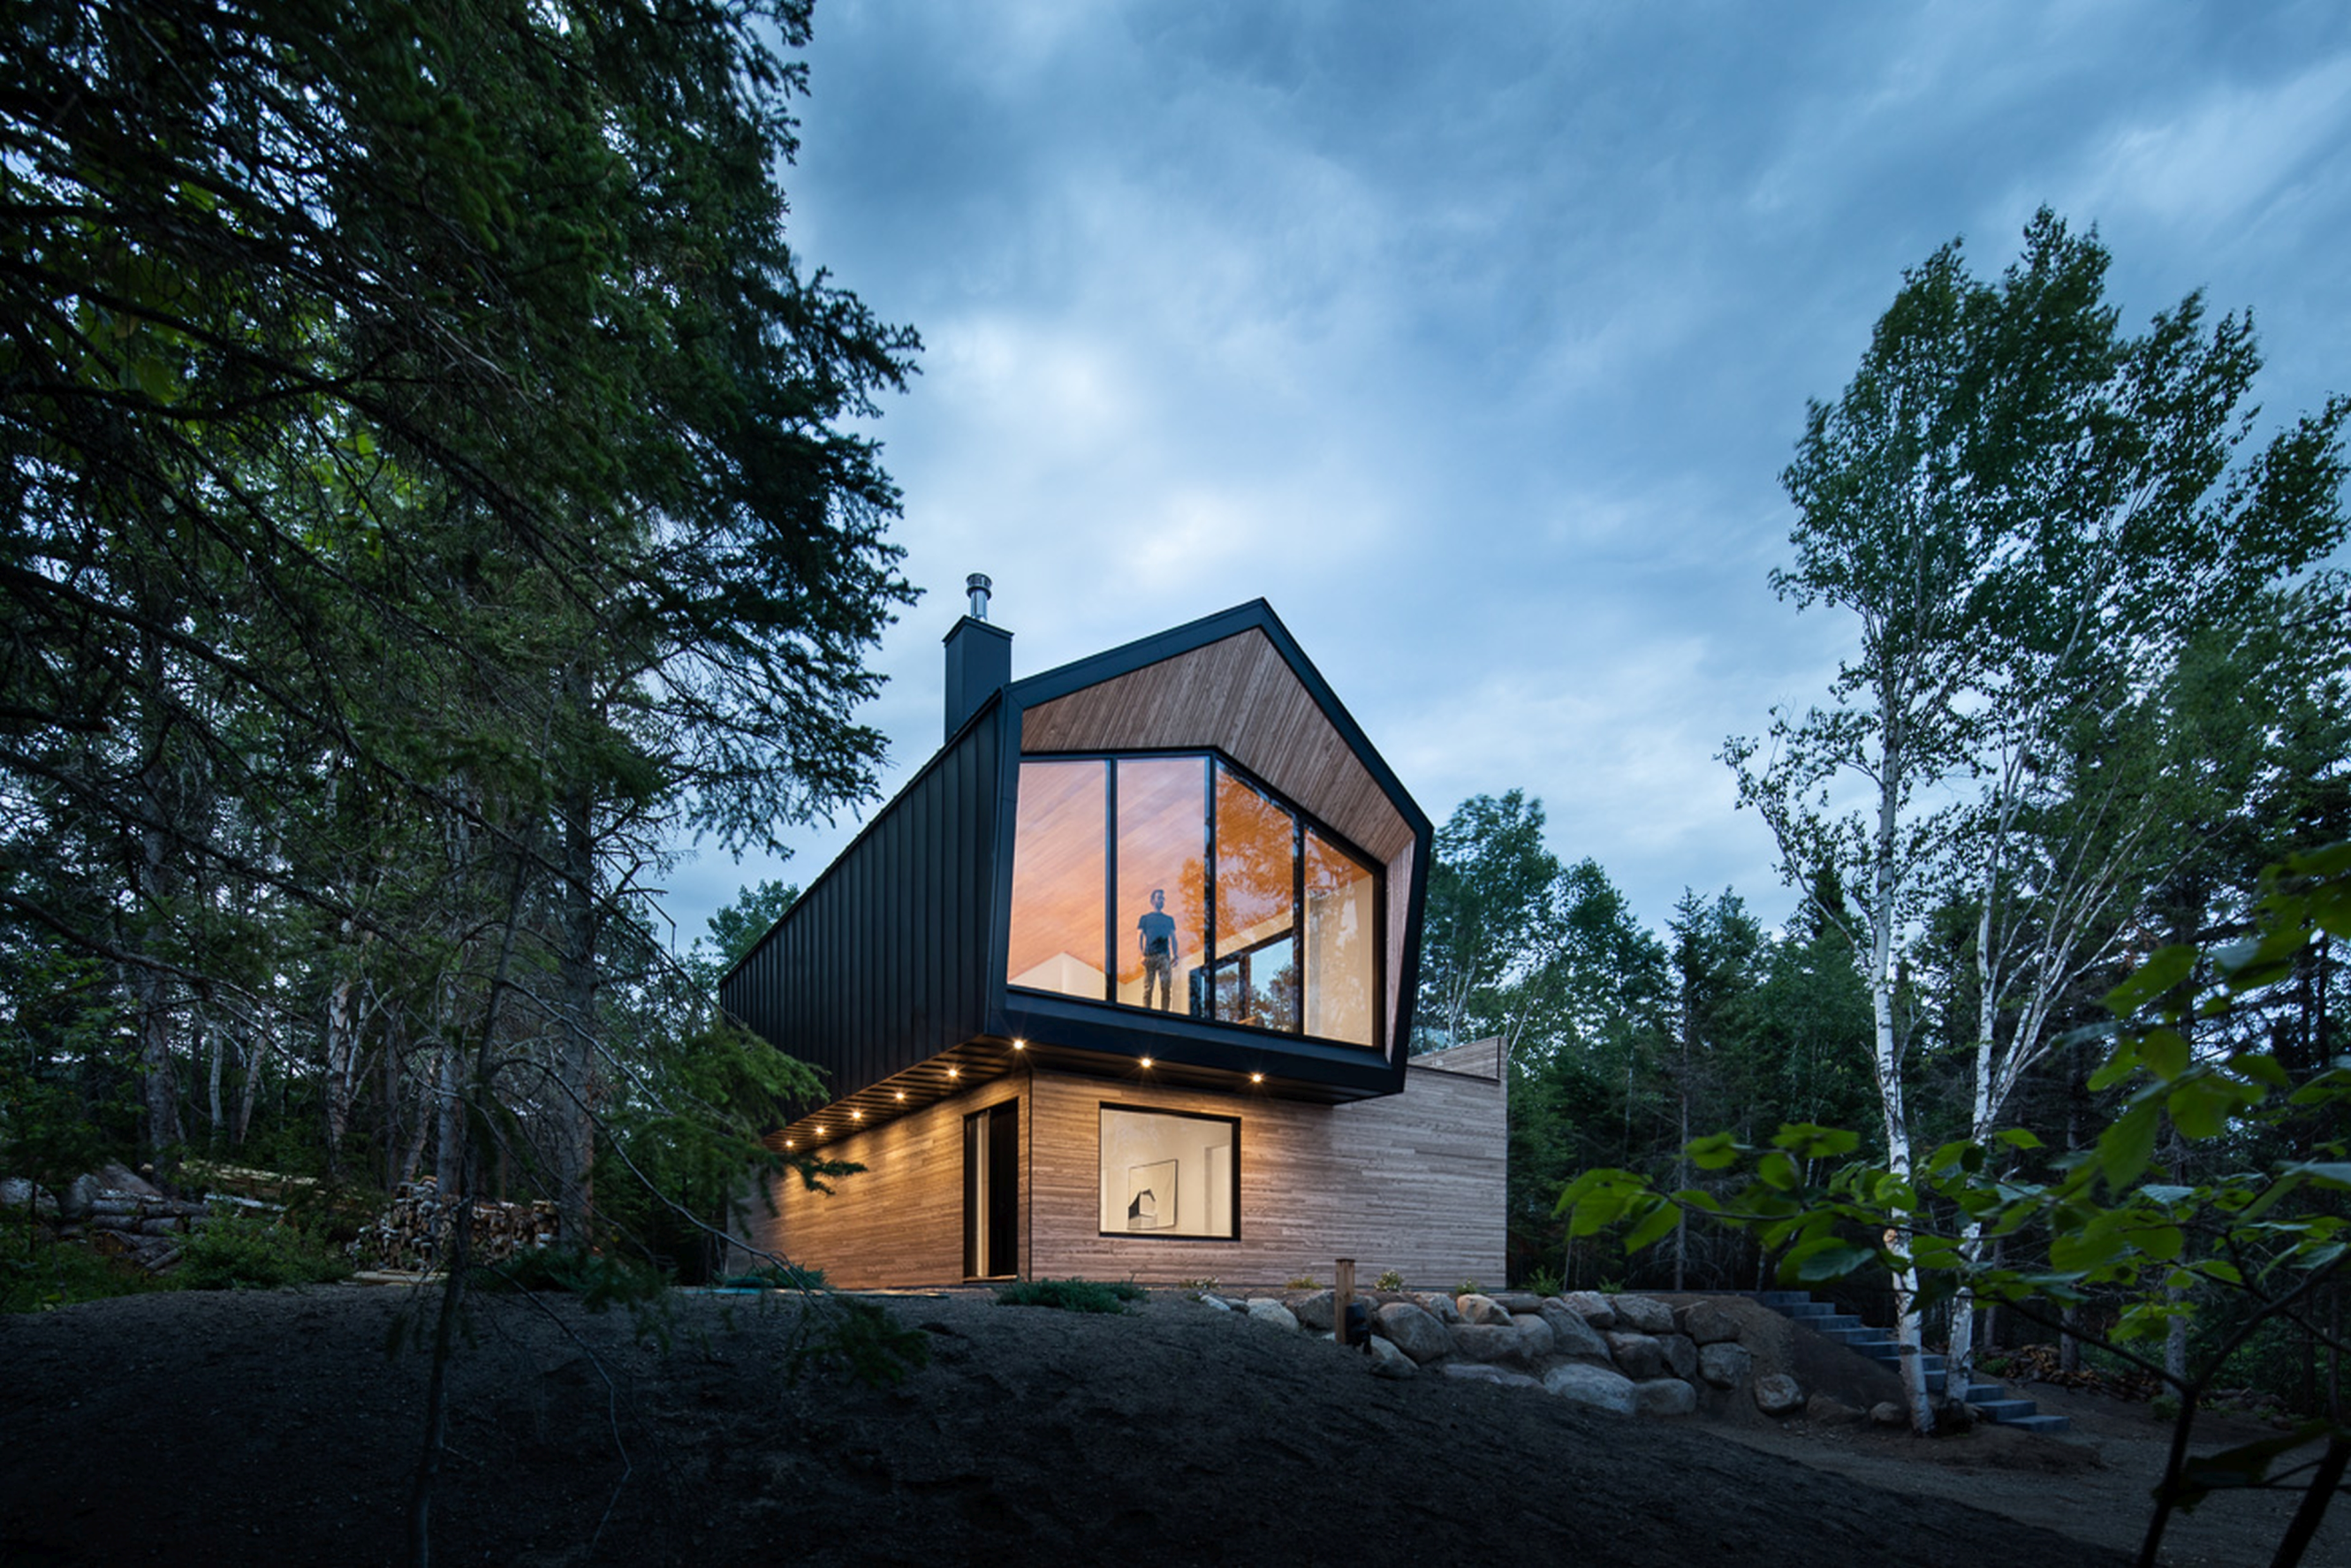 A modern and luxurious chalet at dusk with a person looking out of the floor to ceiling windows on the second floor.